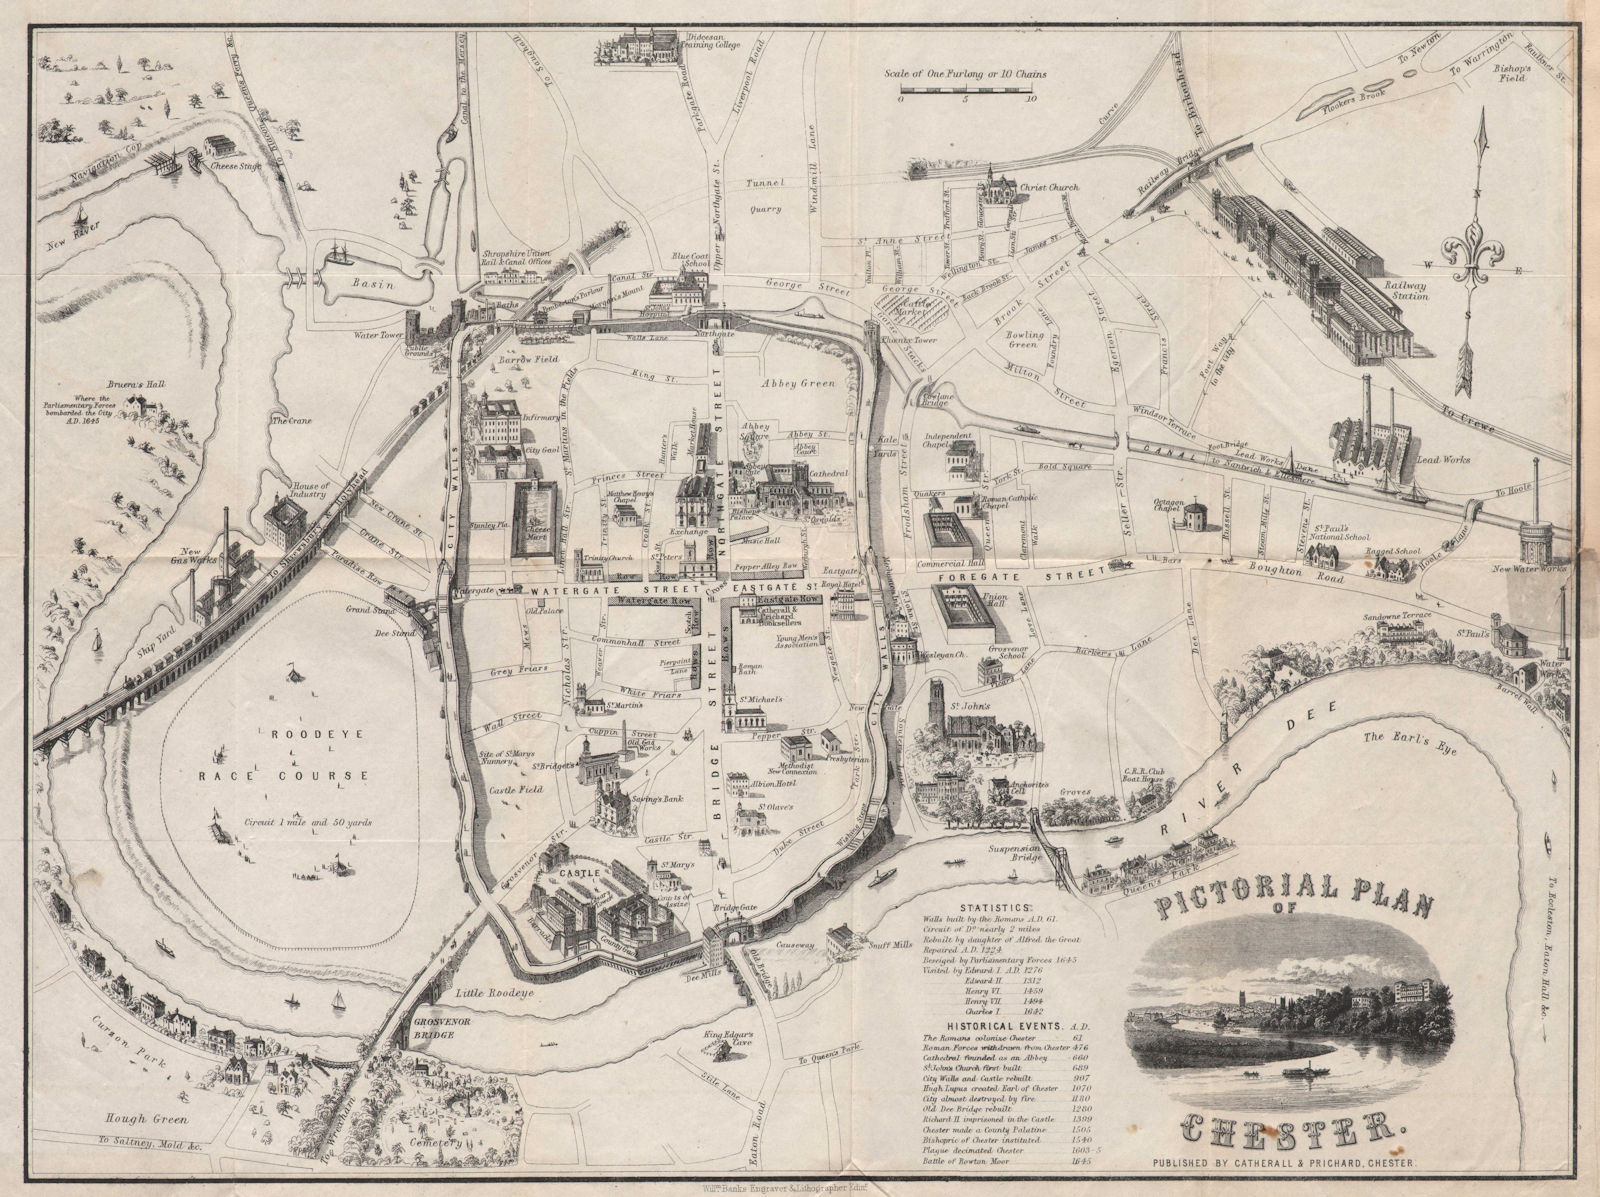 Associate Product 'Pictorial Plan of Chester'. Town city plan by CATHERALL & PRICHARD c1870 map